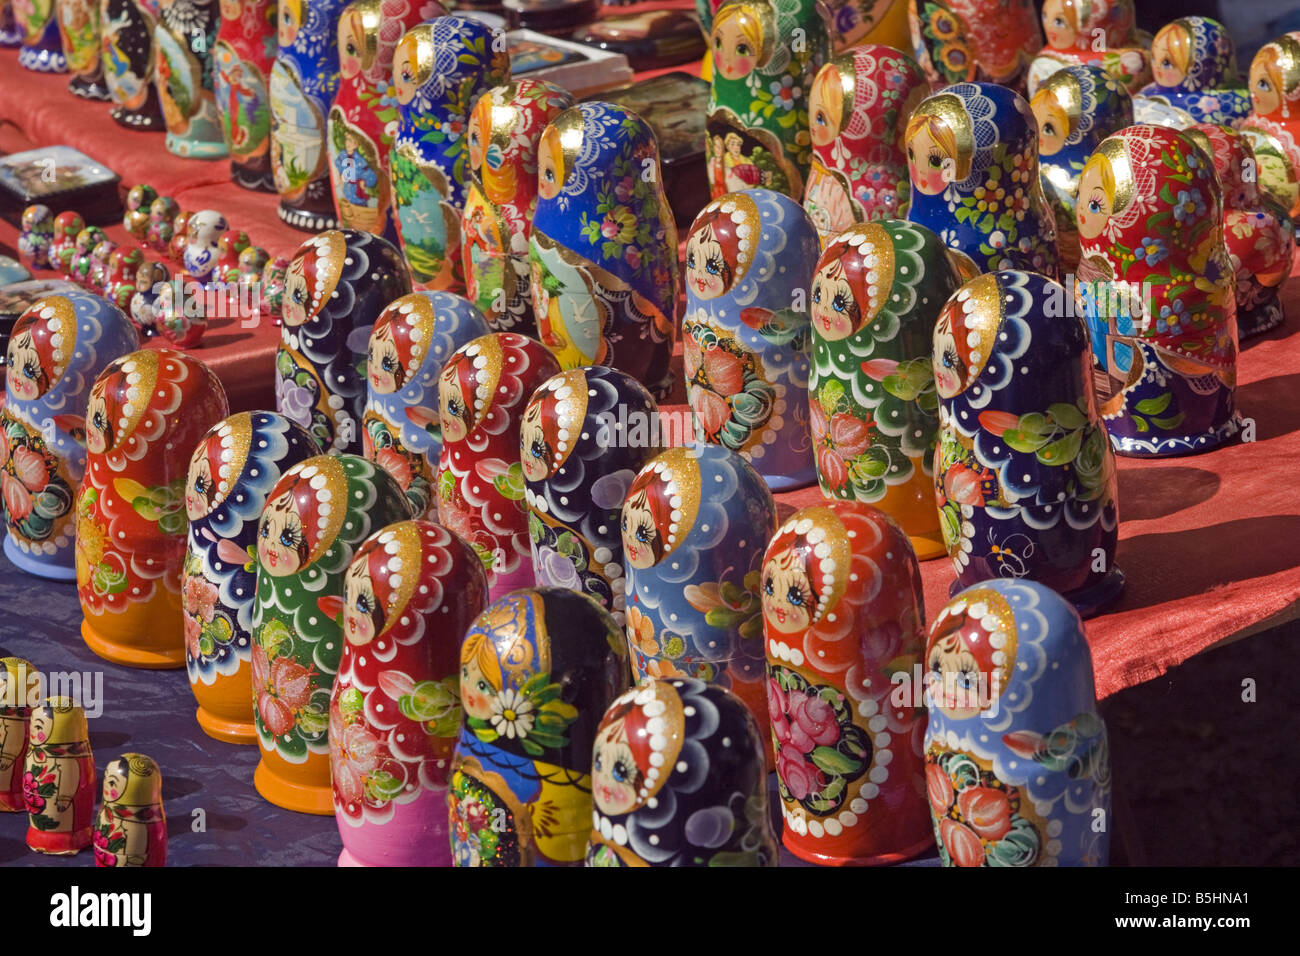 Russian style nested dolls on sale in Sofia the capital of Bulgaria. Stock Photo